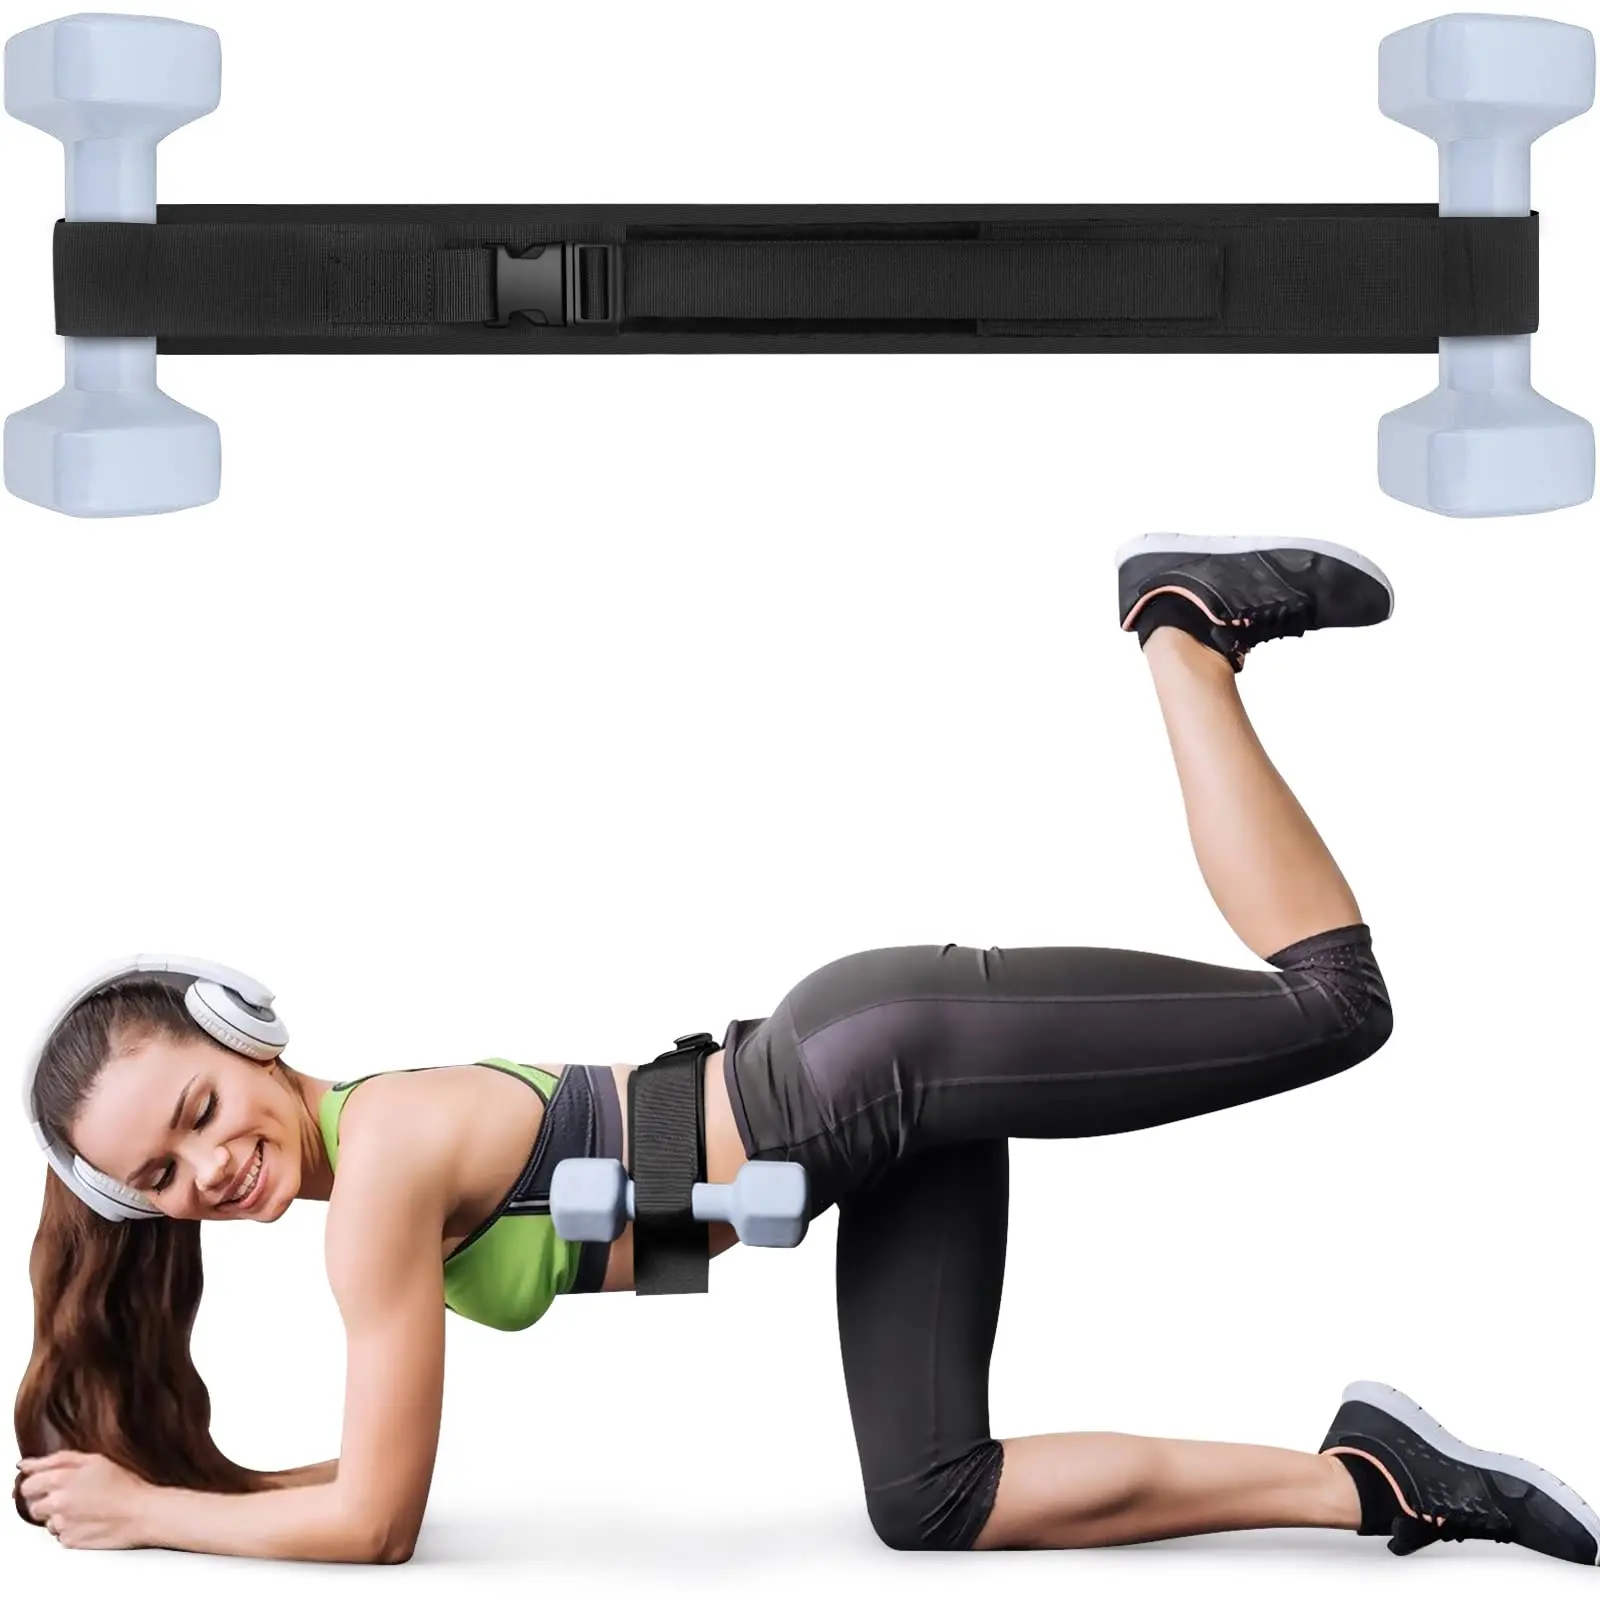 Anti slip Hip Thrust Belt Multifunctional hip thrust barbell pad for Gym Home Workouts